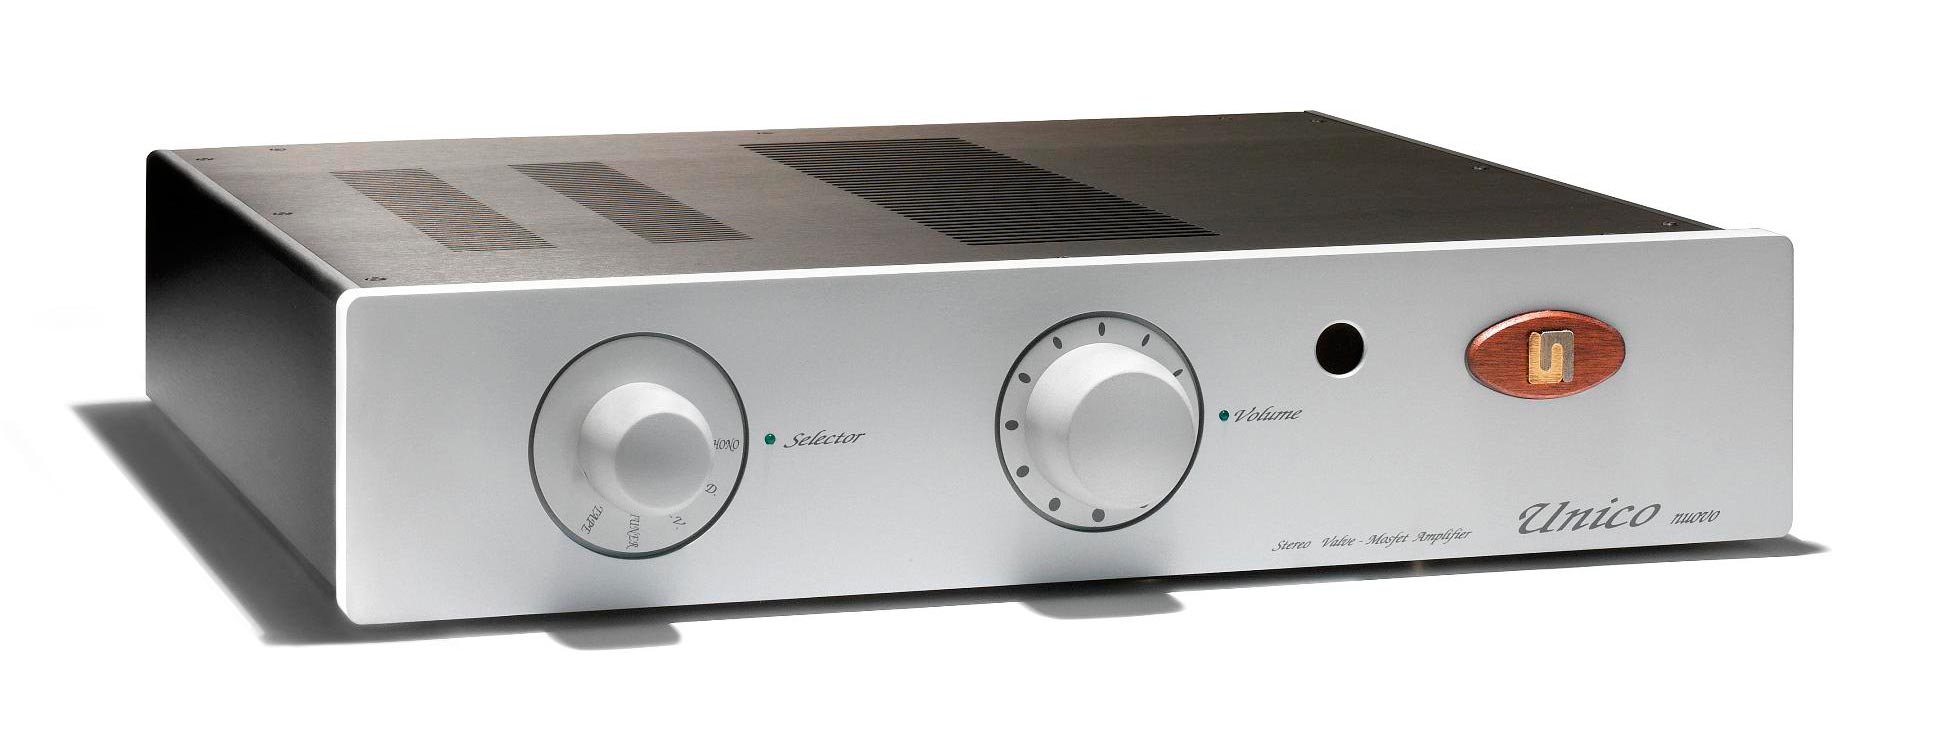 Unico Nuovo Integrated Amplifier